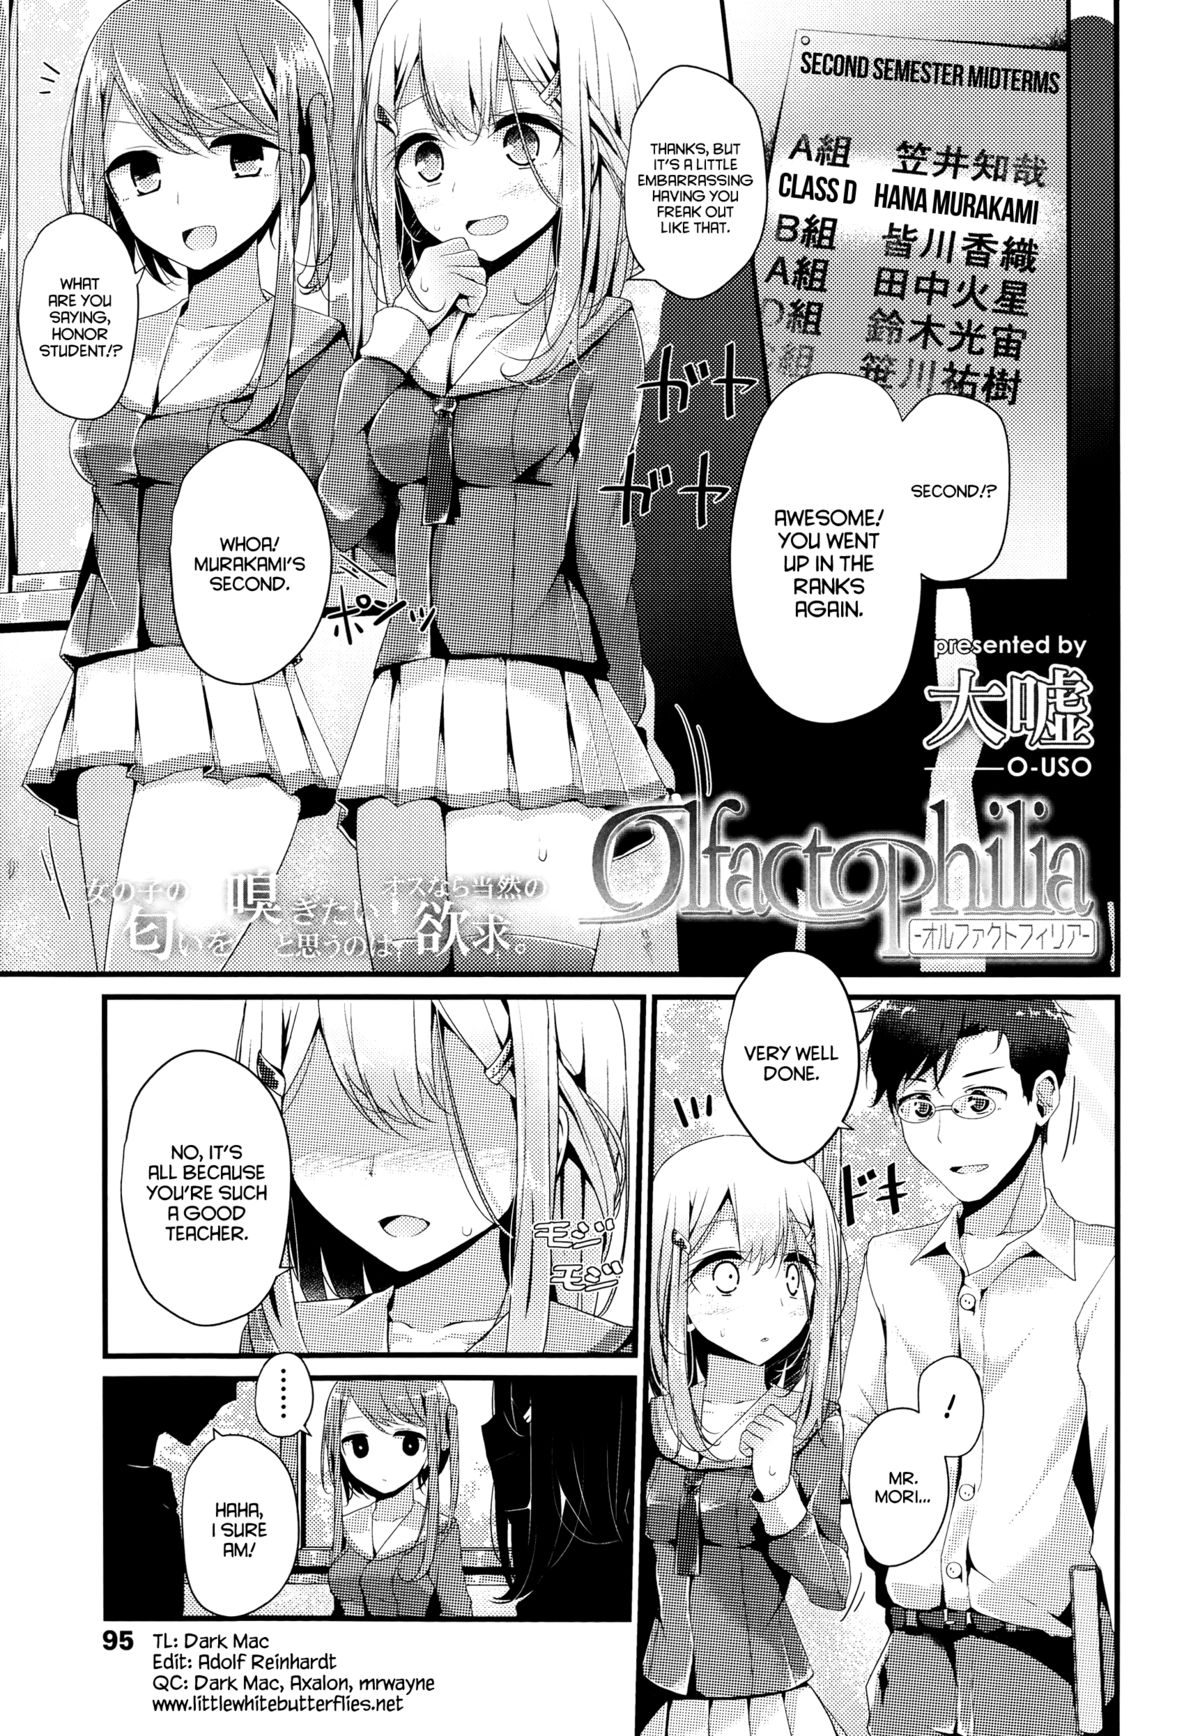 [Oouso] Olfactophilia (Girls forM Vol. 06) [English] =LWB= page 1 full